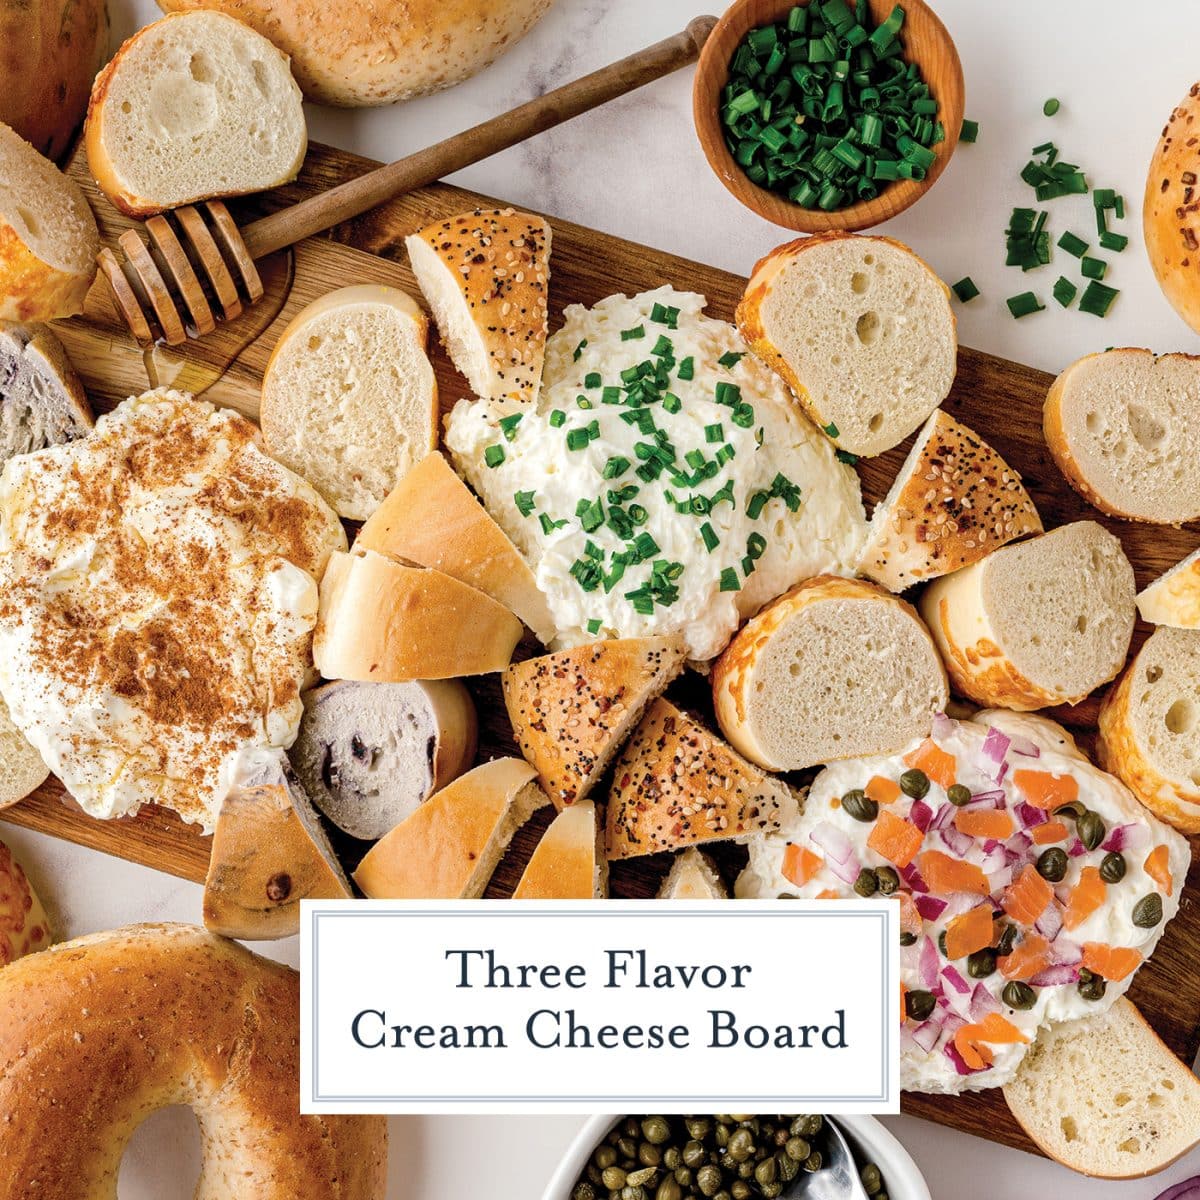 FLOWER CHEESE PLATE -- easy, beautiful appetizer idea for any party